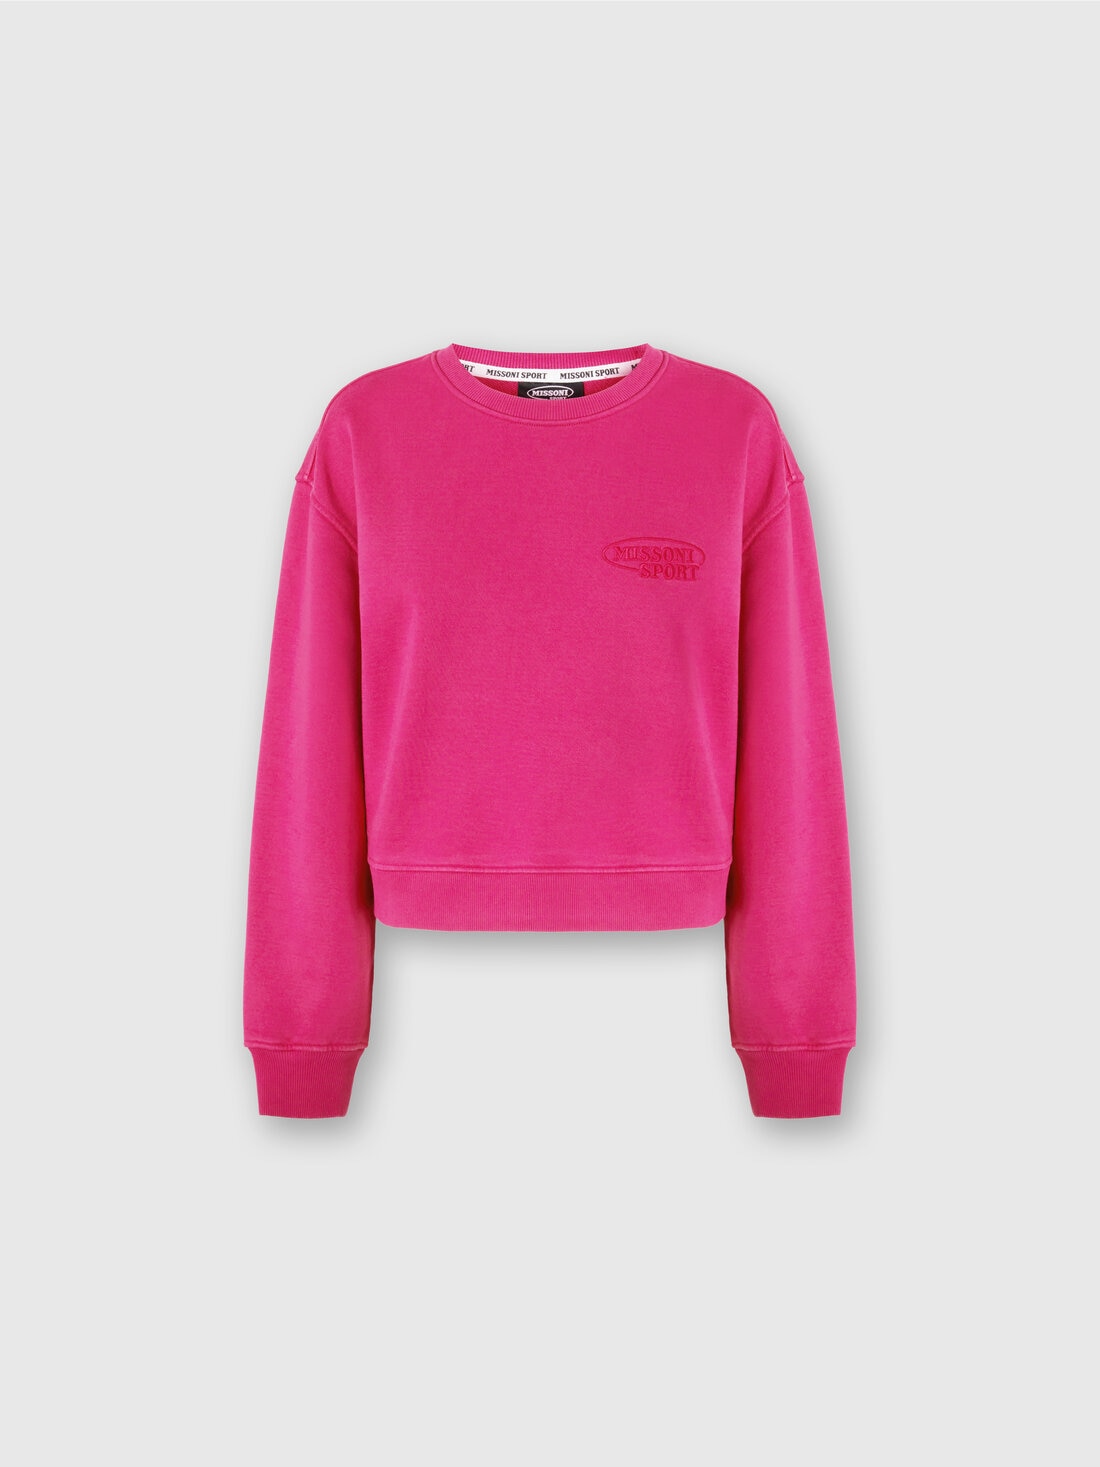 Crew-neck sweatshirt in cotton with logo, Red  - SS24SW03BJ00H0S30CZ - 0